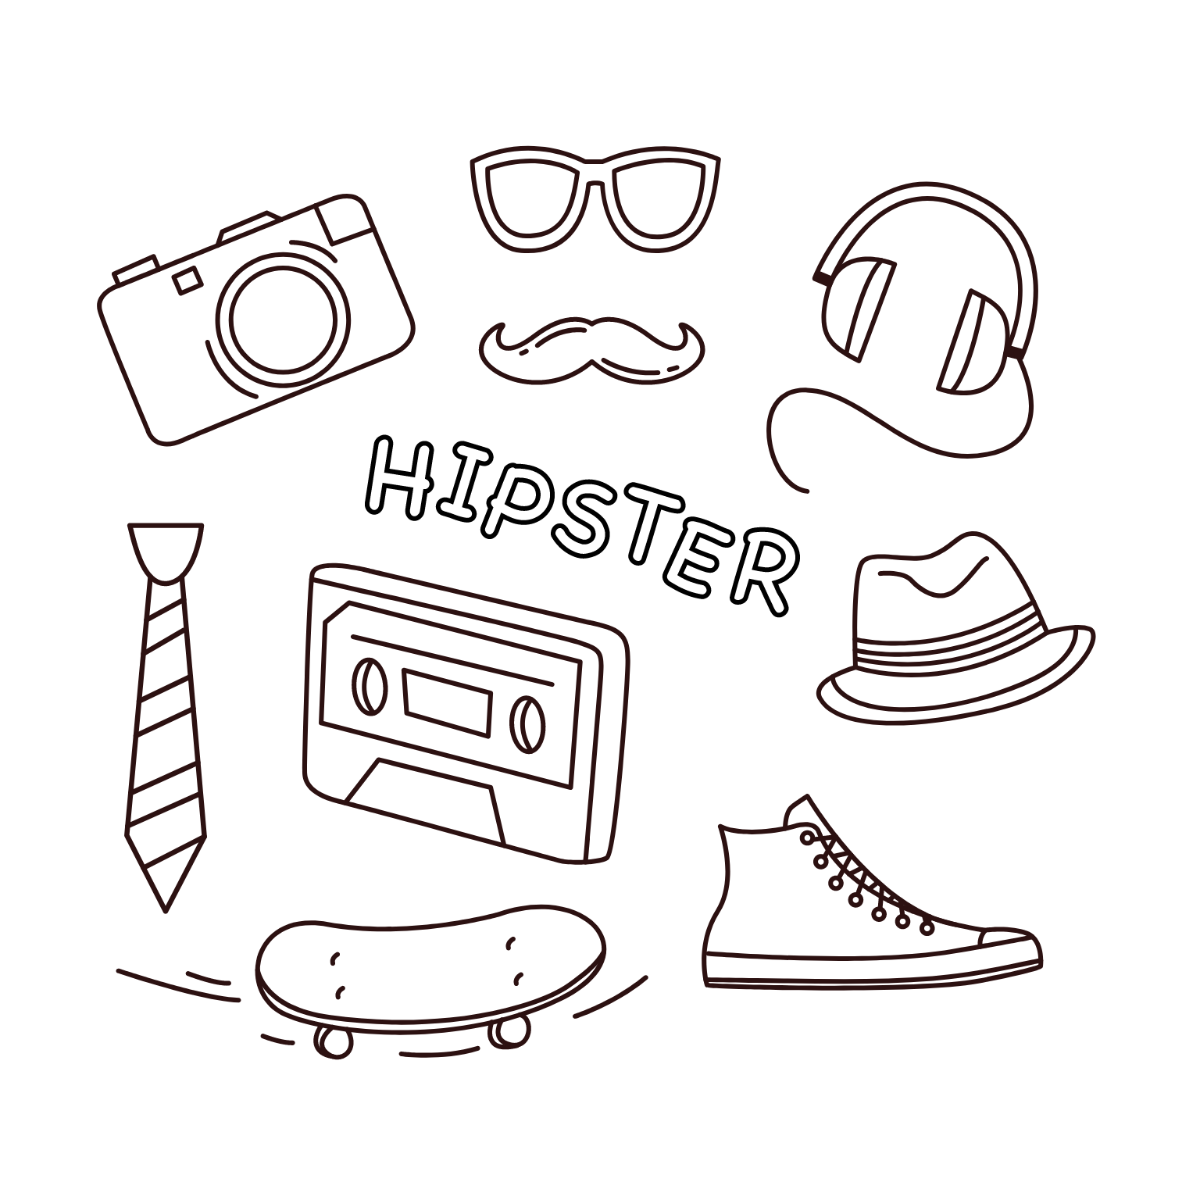 Doodle household items Royalty Free Vector Image